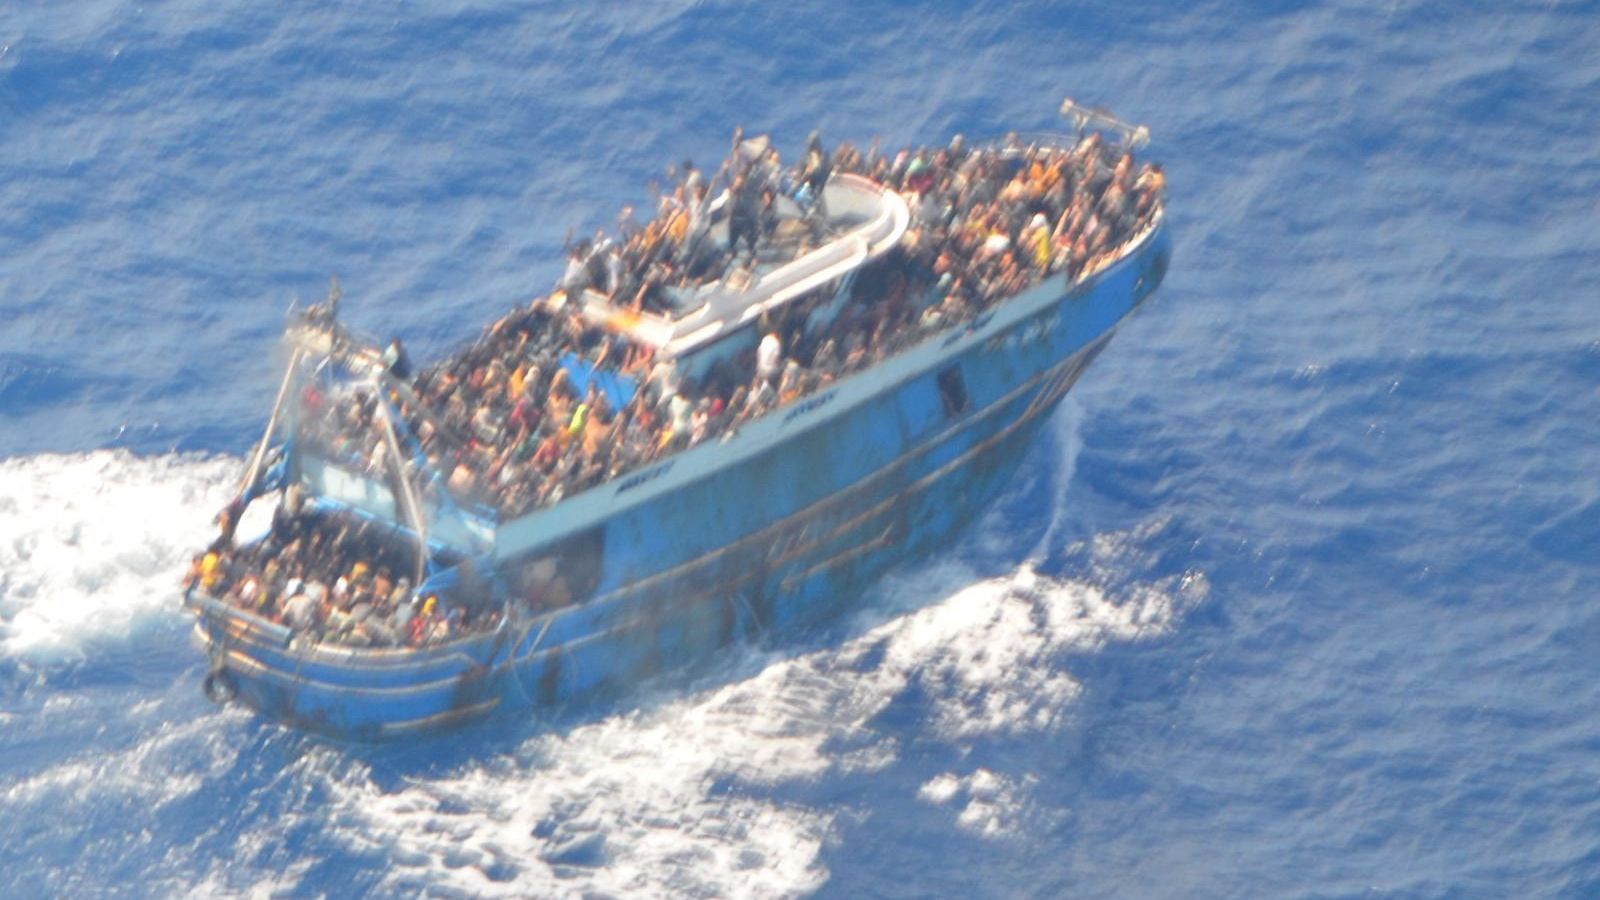 Migration across the Mediterranean is a brutal throw of the dice